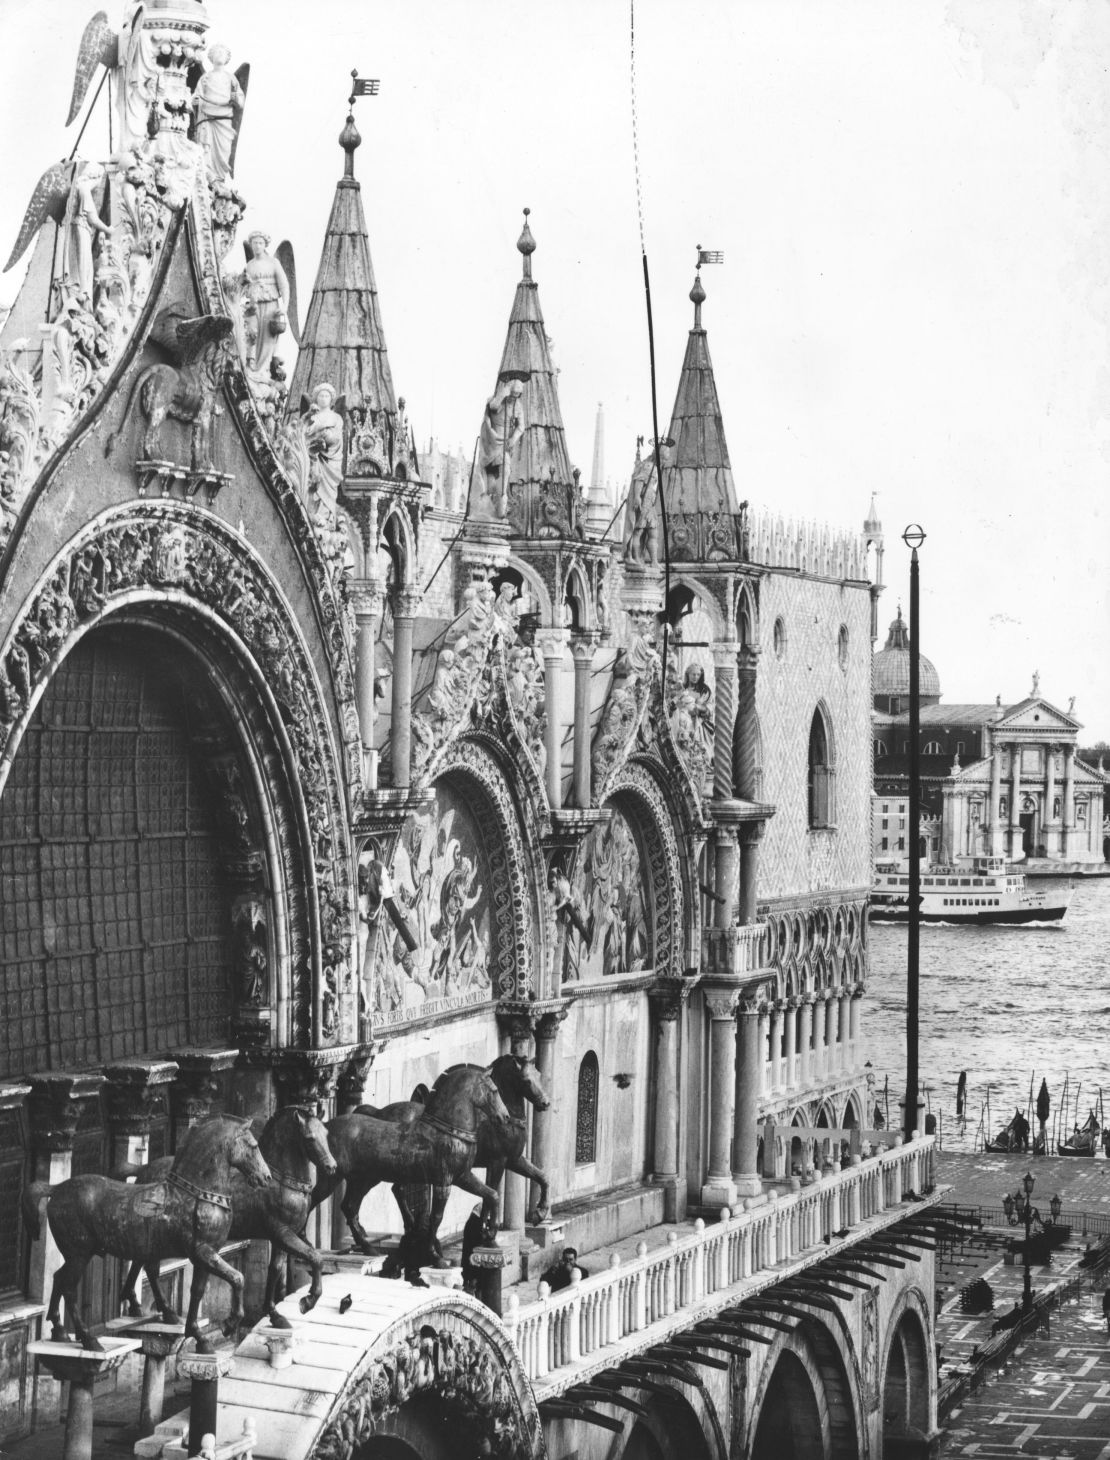 Many components of Saint Mark's Basilica in Venice, including these famous bronze horses, were looted from Constantinople 